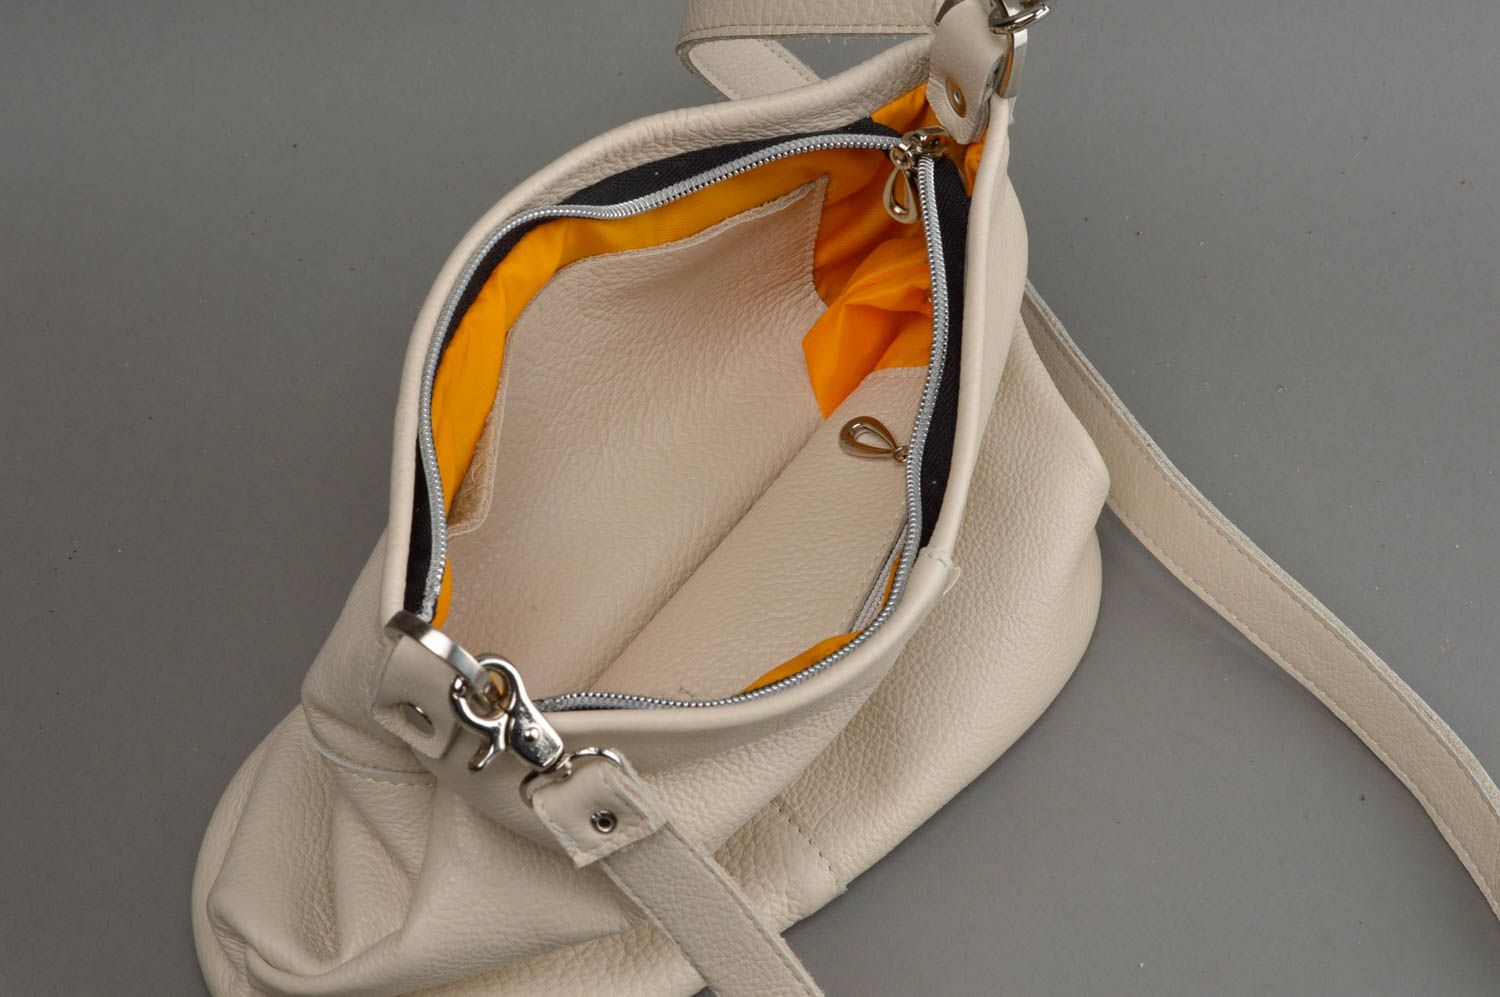 Beautiful handmade leather bag for women shoulder bag designs gifts for her photo 3